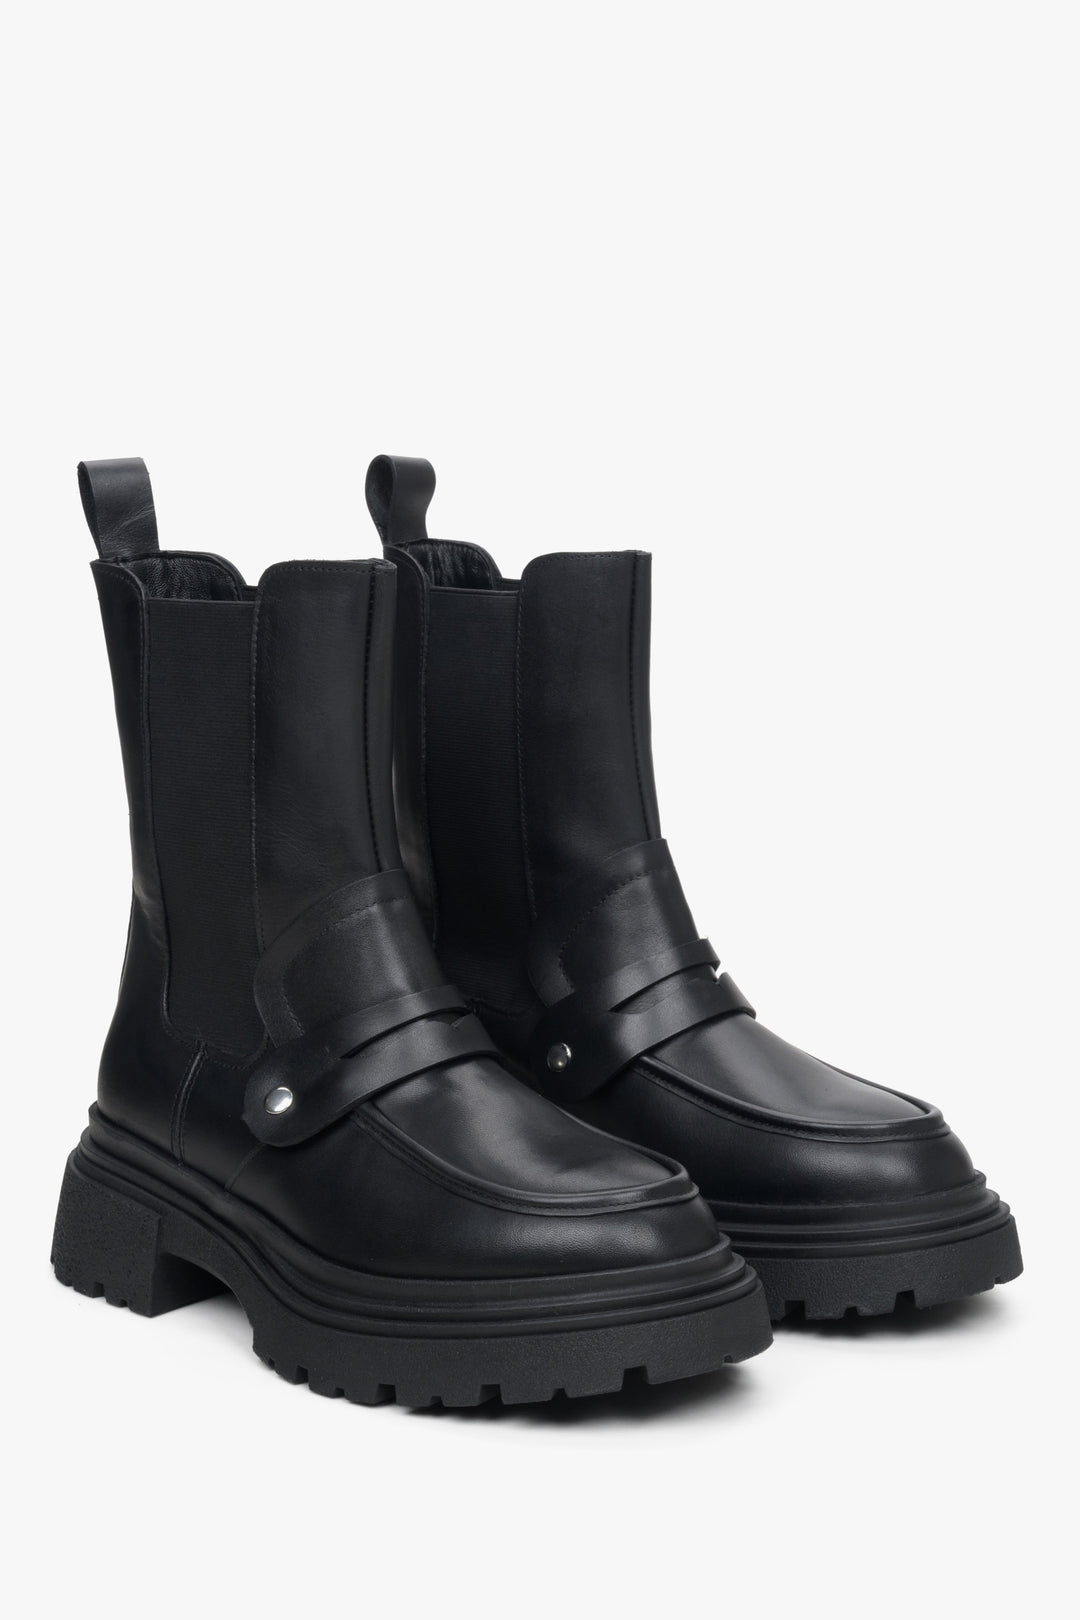 Women's black leather Chelsea boots with ornament.